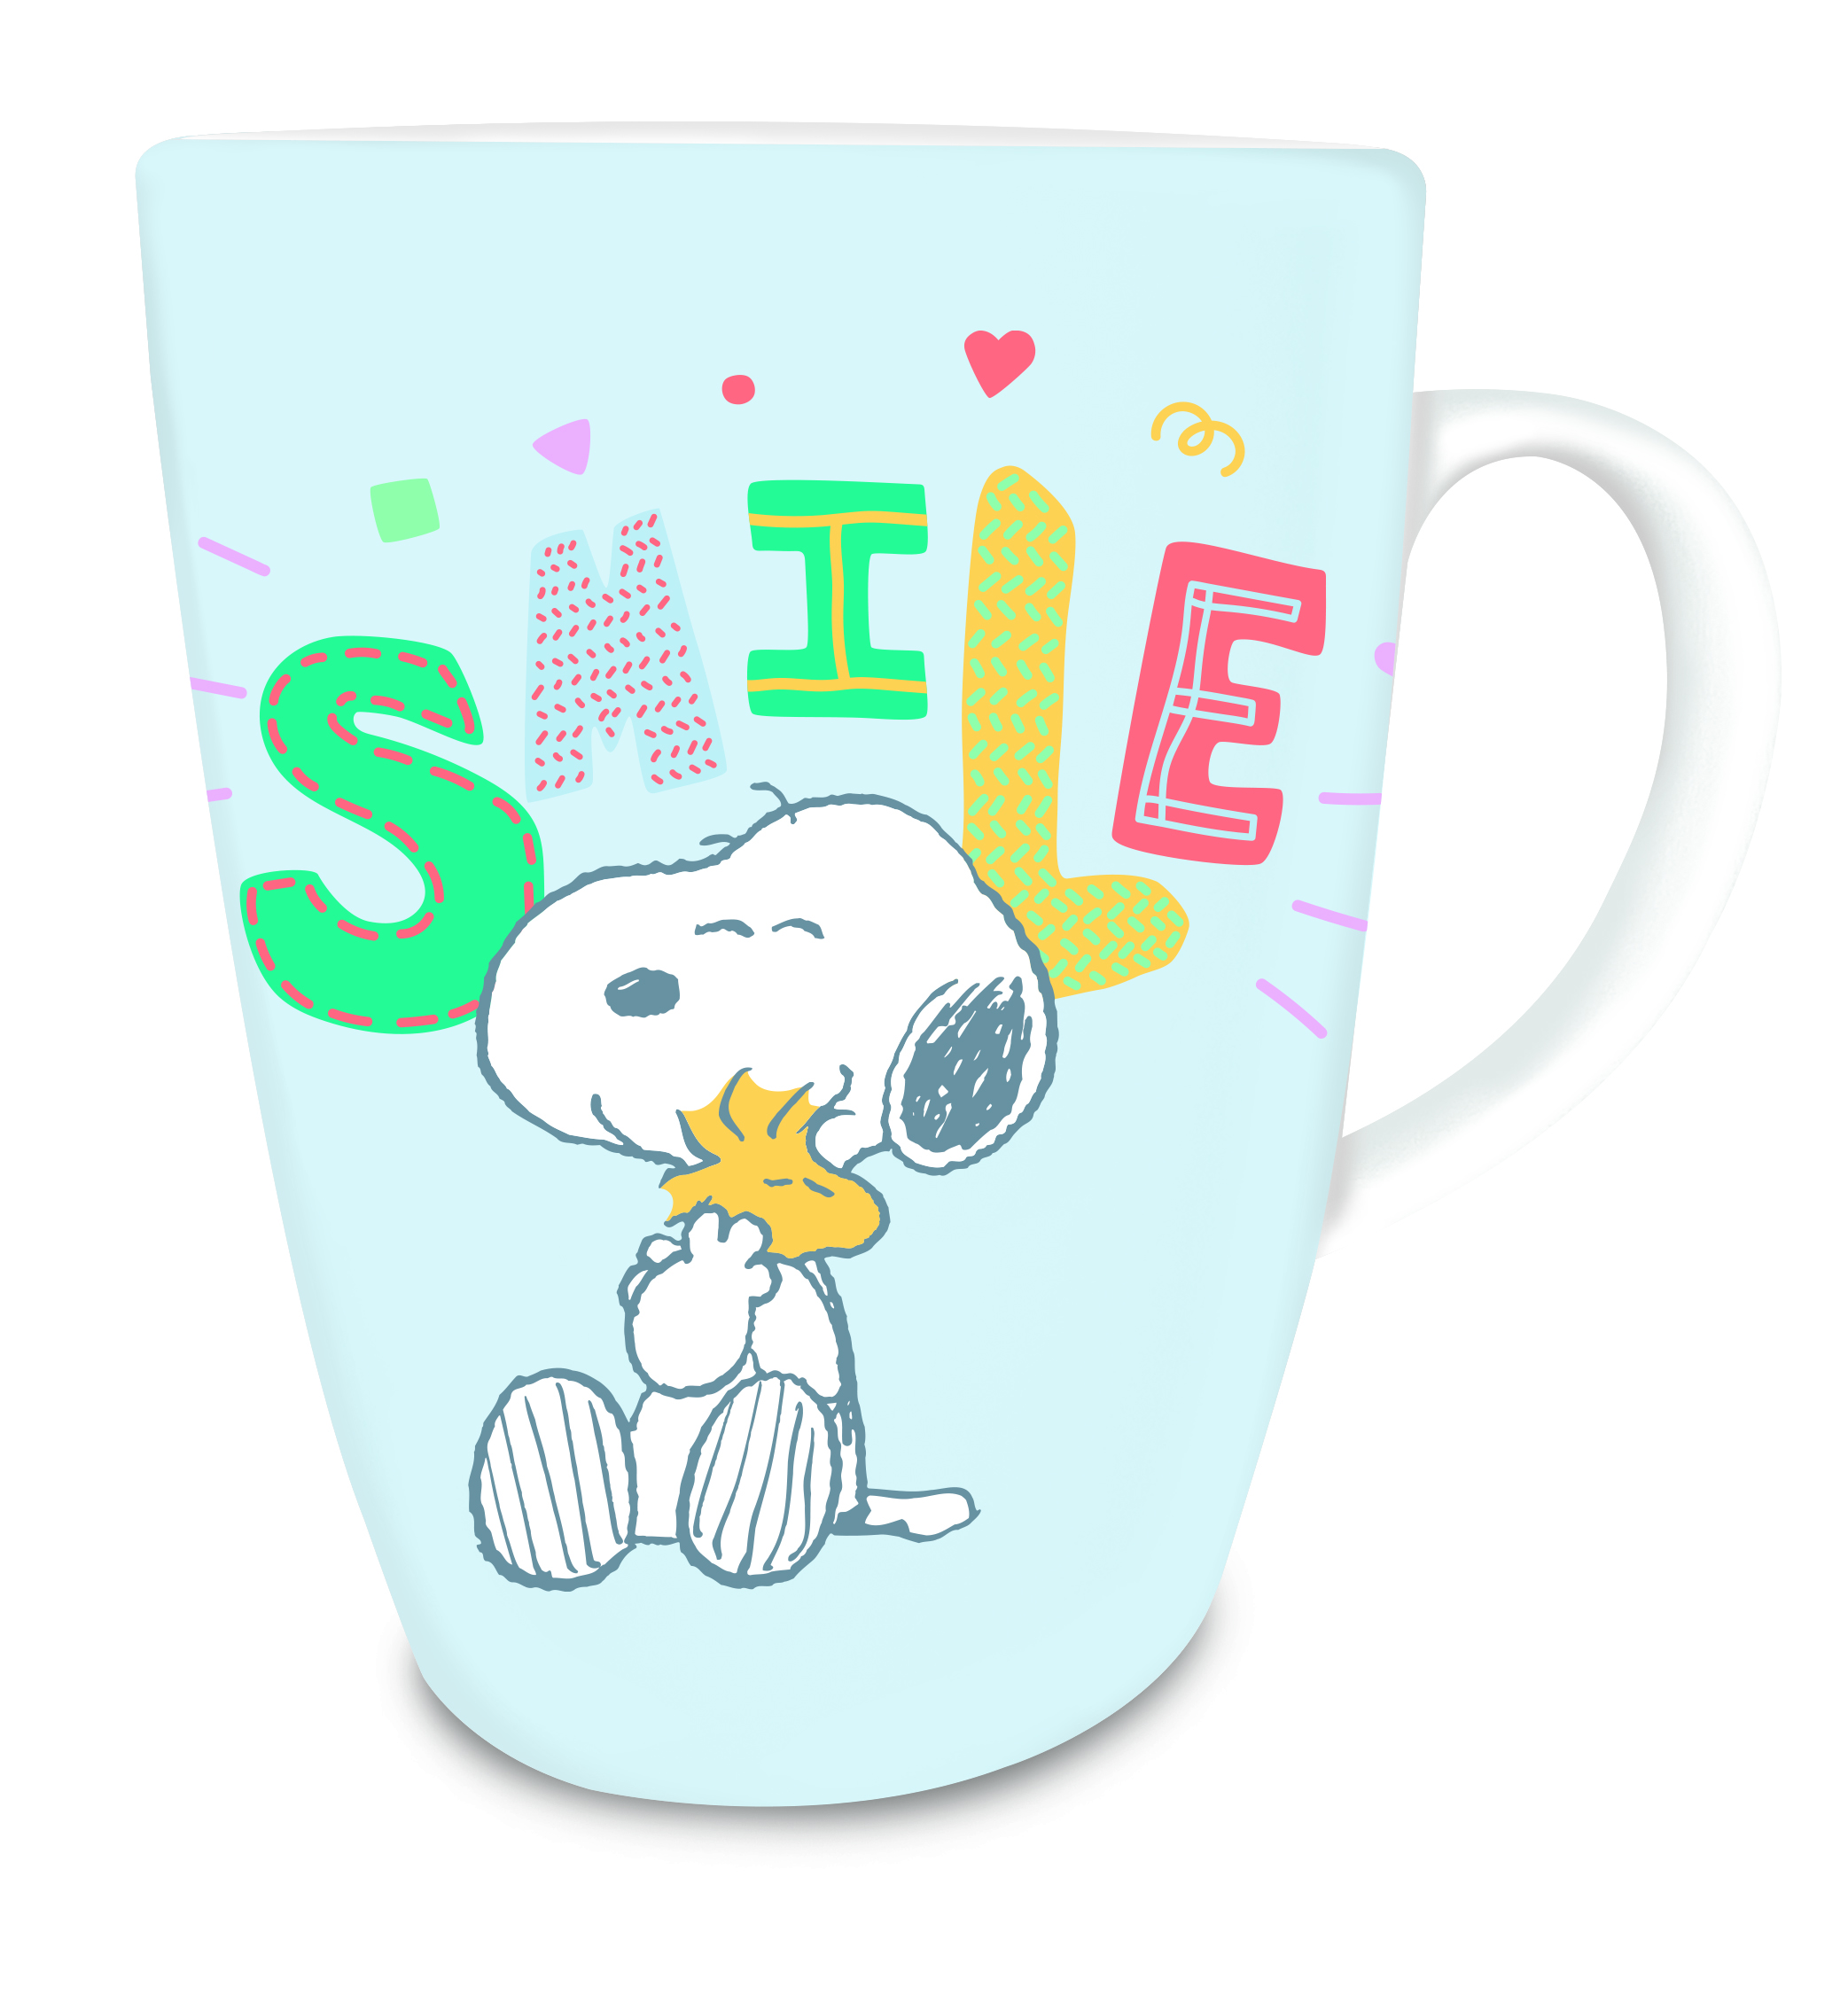 Get a free limited edition Peanuts Snoopy Cup with purchase of Darlie toothpastes - 1